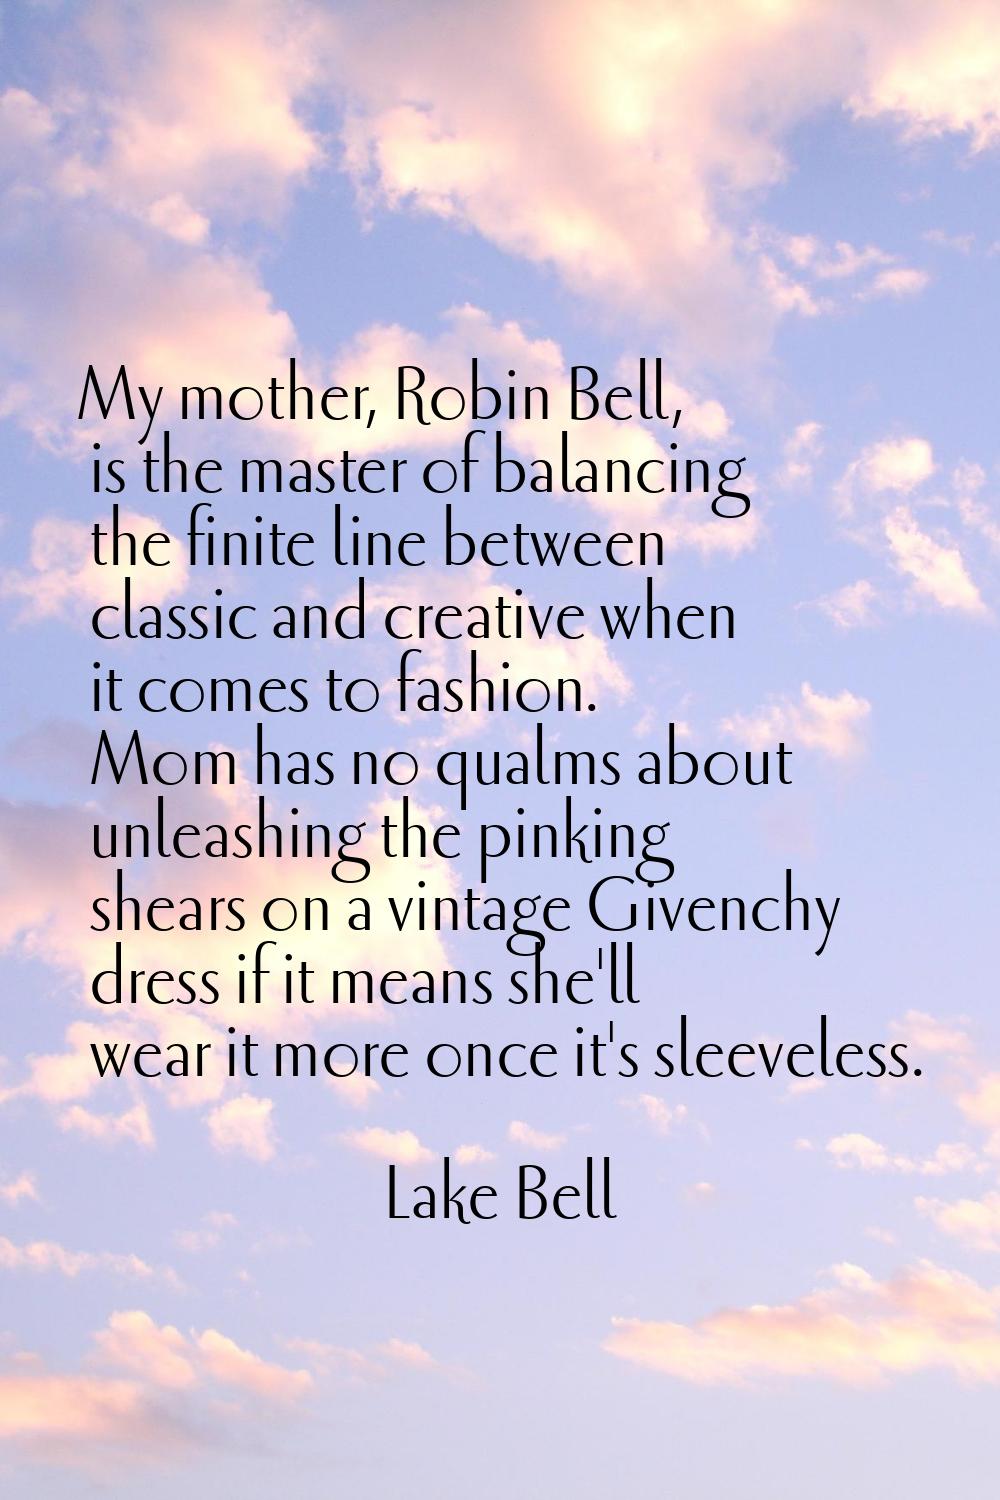 My mother, Robin Bell, is the master of balancing the finite line between classic and creative when